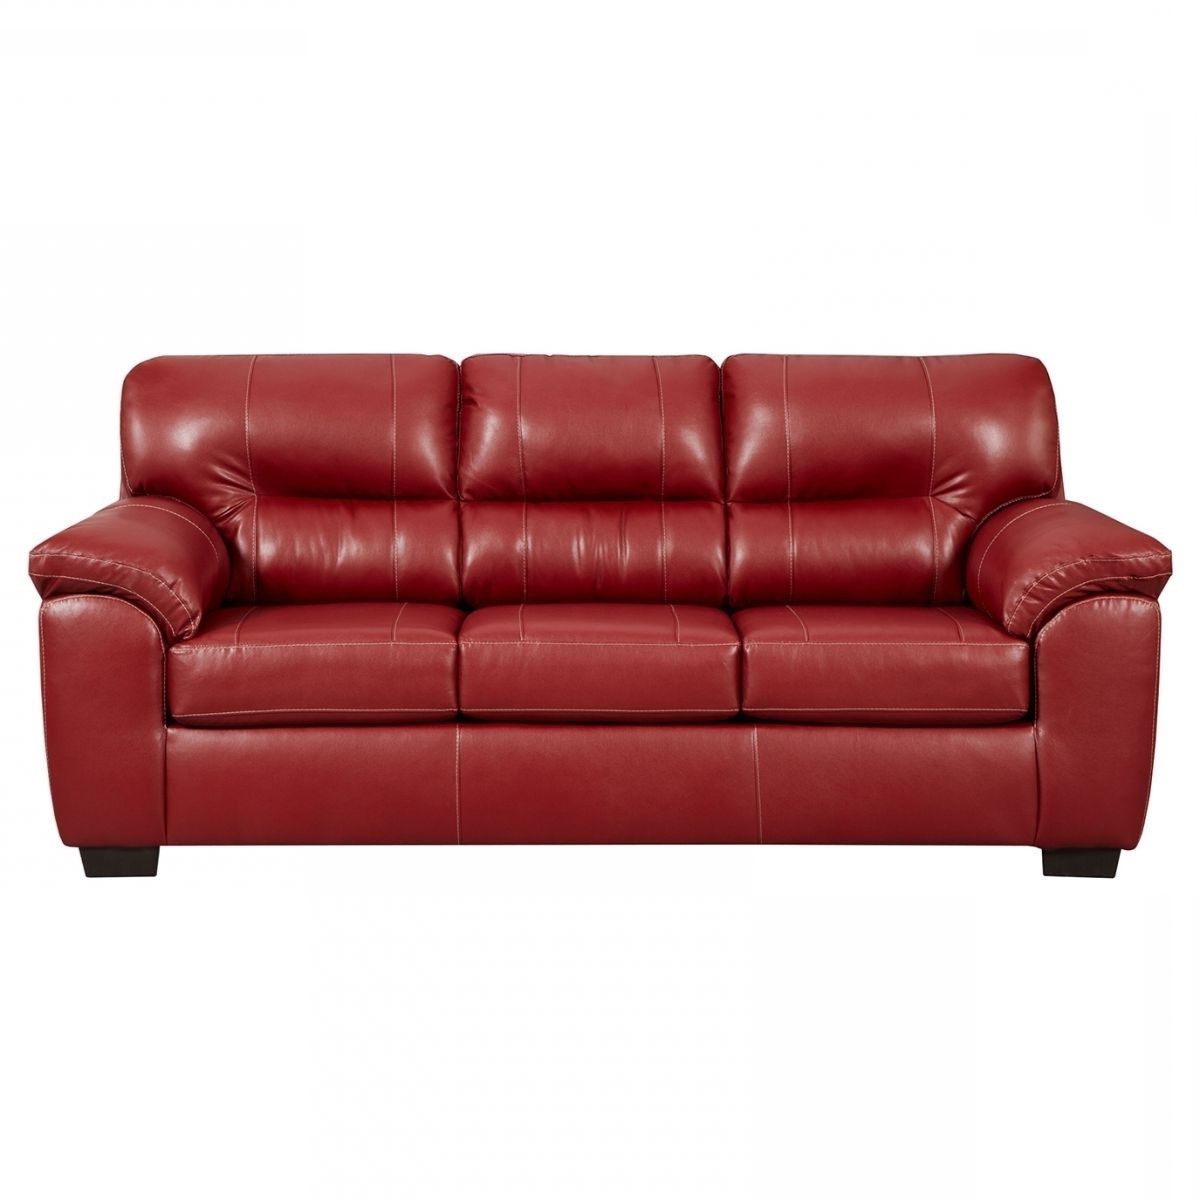 Austin Red Sleeper Sofa For Well Liked Red Sleeper Sofas (View 10 of 20)